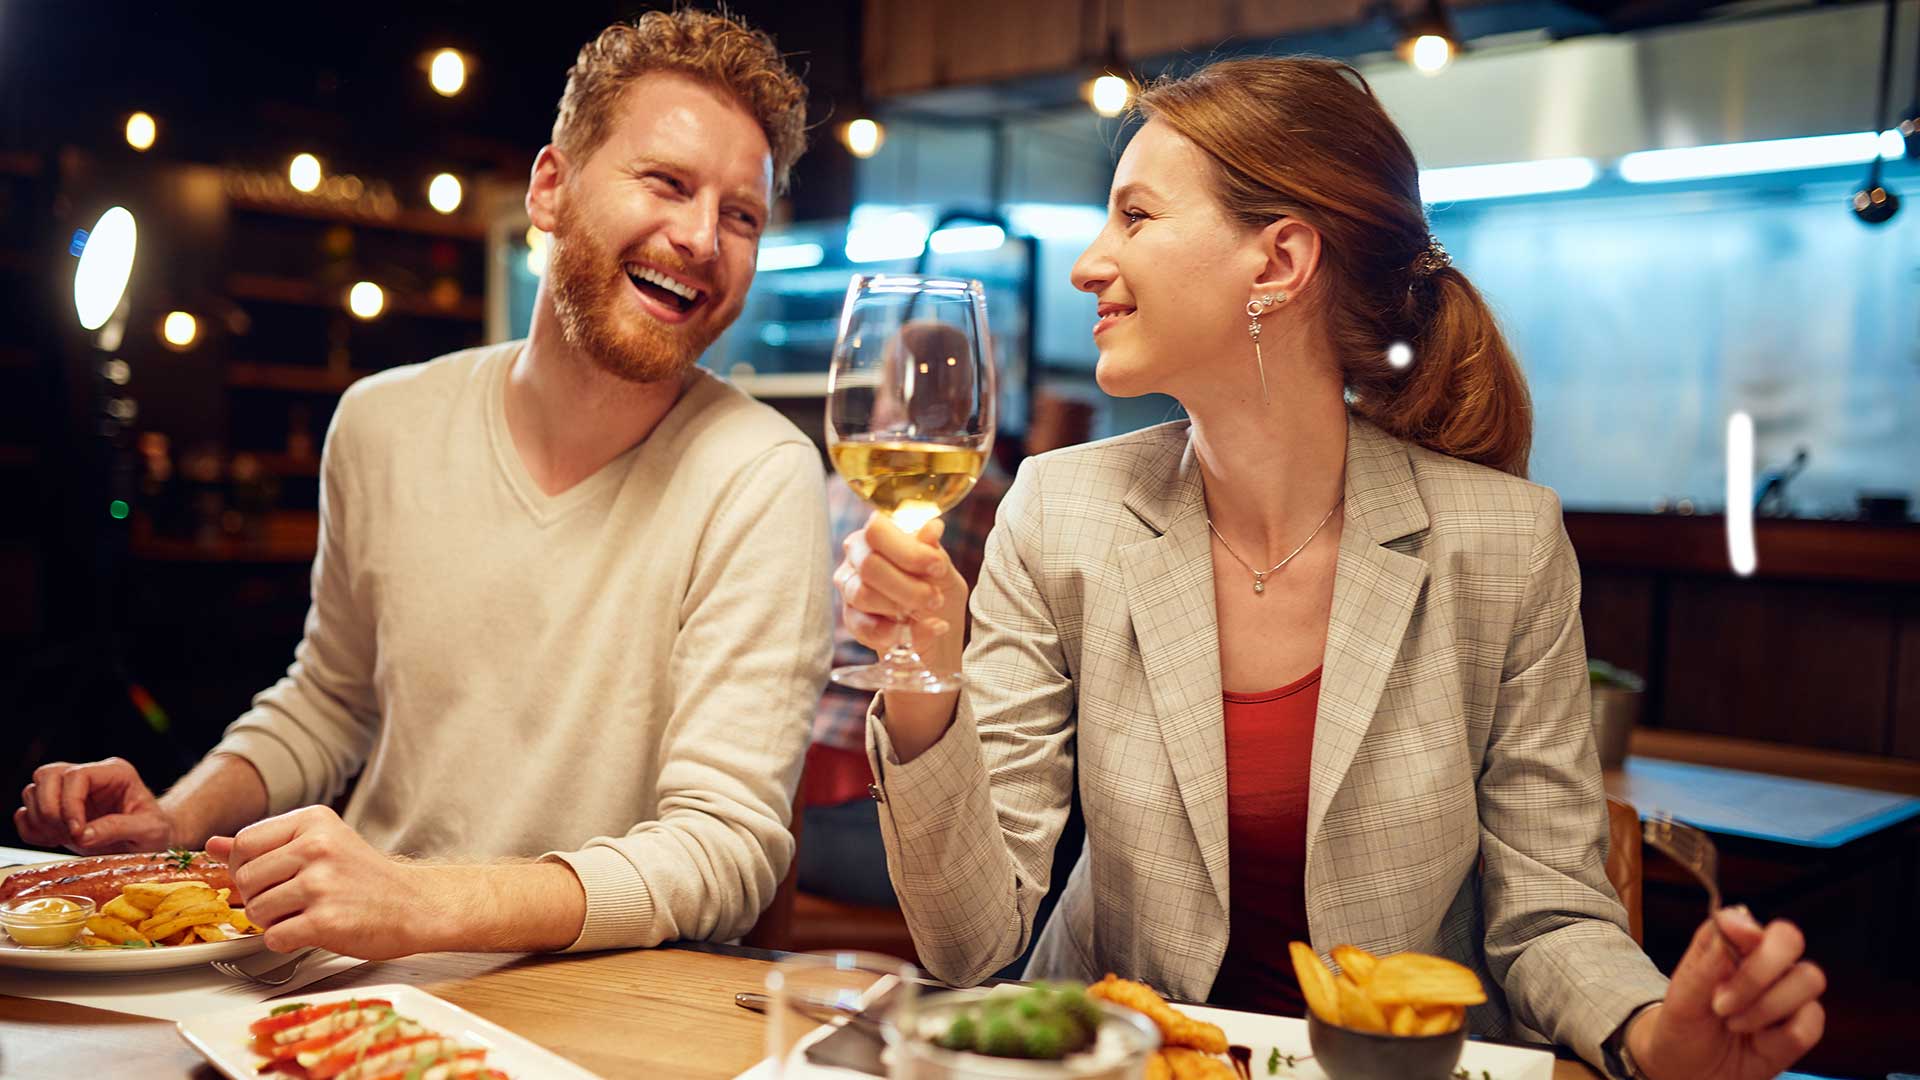 Smiling couple in a restaurant, having dinner and talking. The man is talking to the woman while a woman listening to him and drinking white wine.